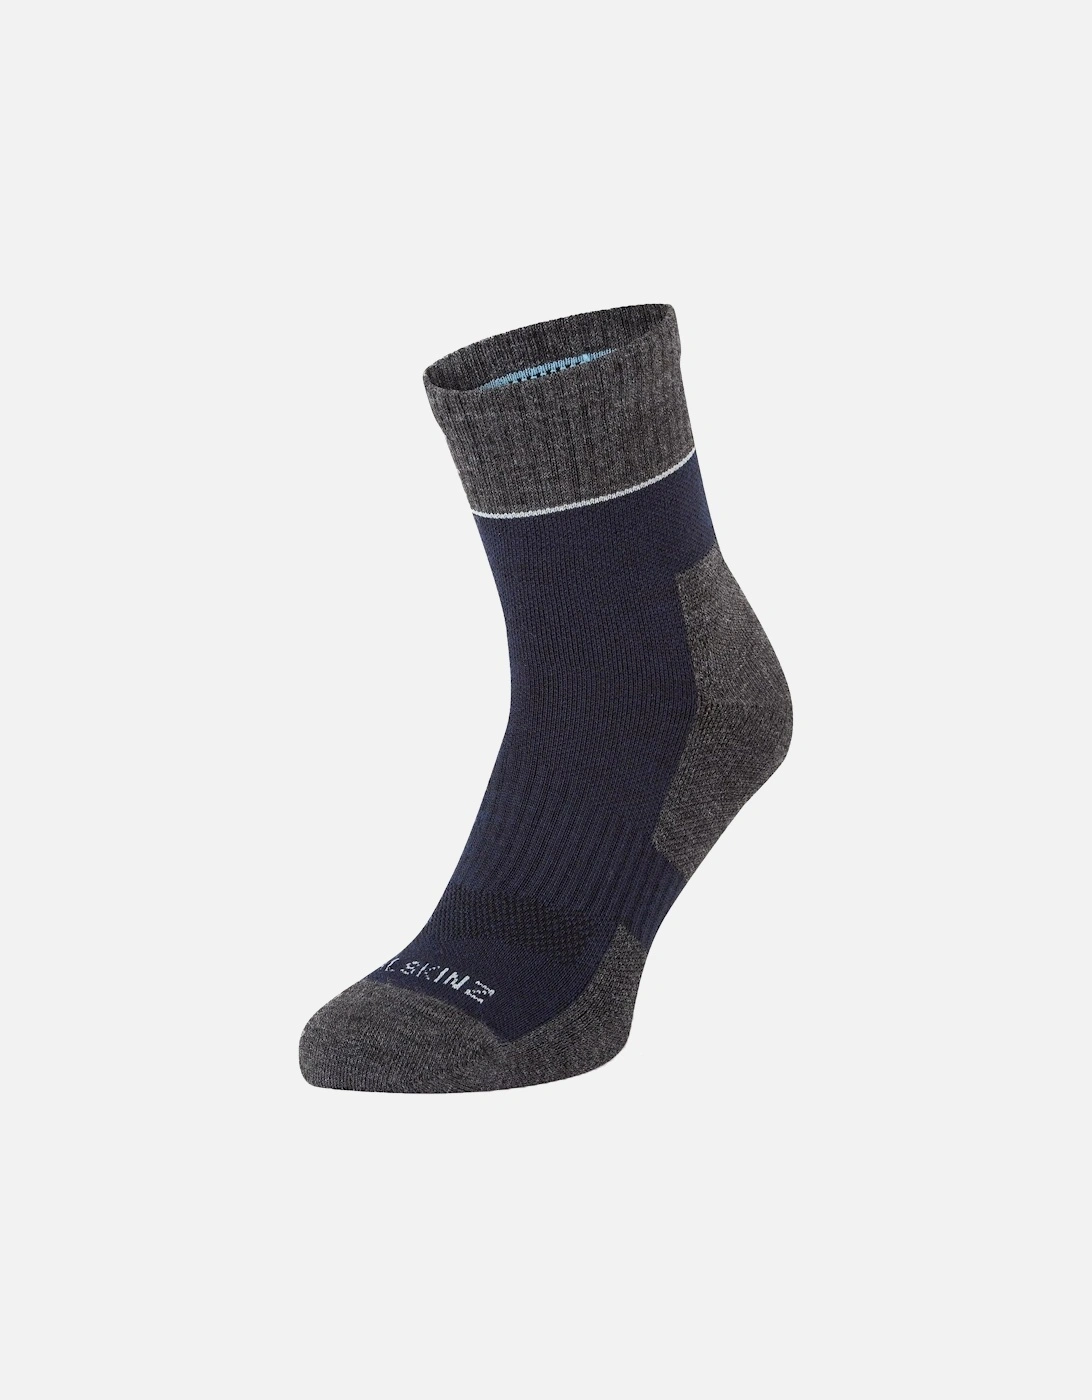 Morston Solo QuickDry Ankle Length Socks